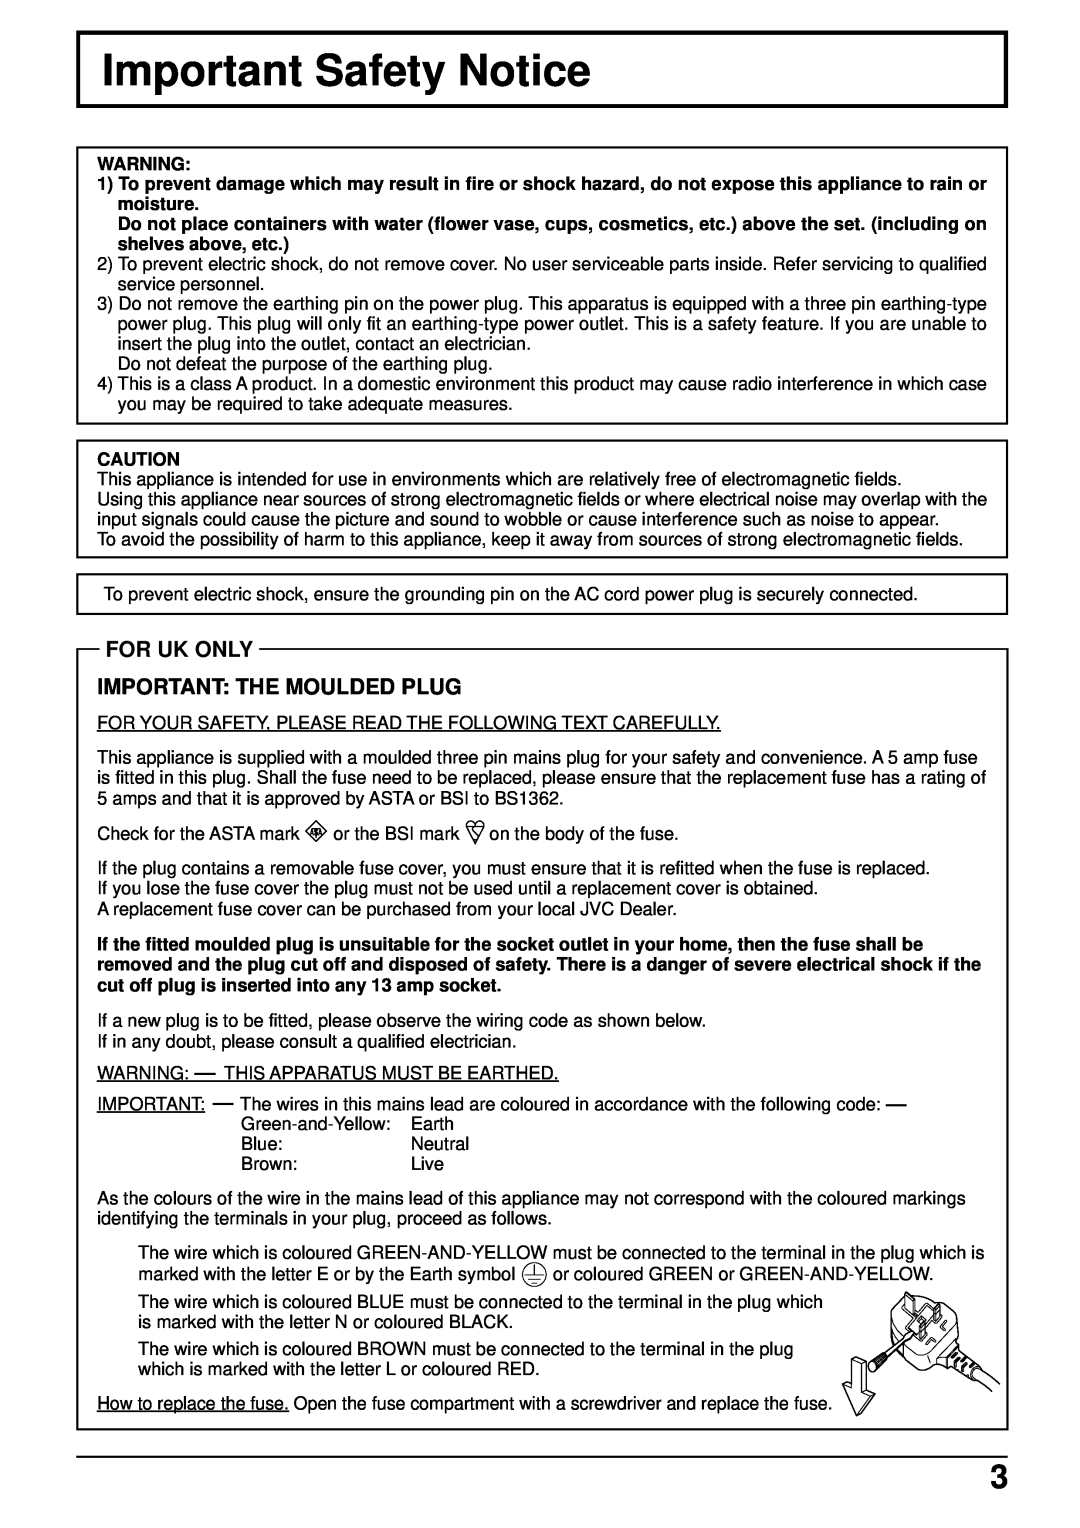 JVC GD-V502PCE manual Important Safety Notice, For Uk Only Important The Moulded Plug 